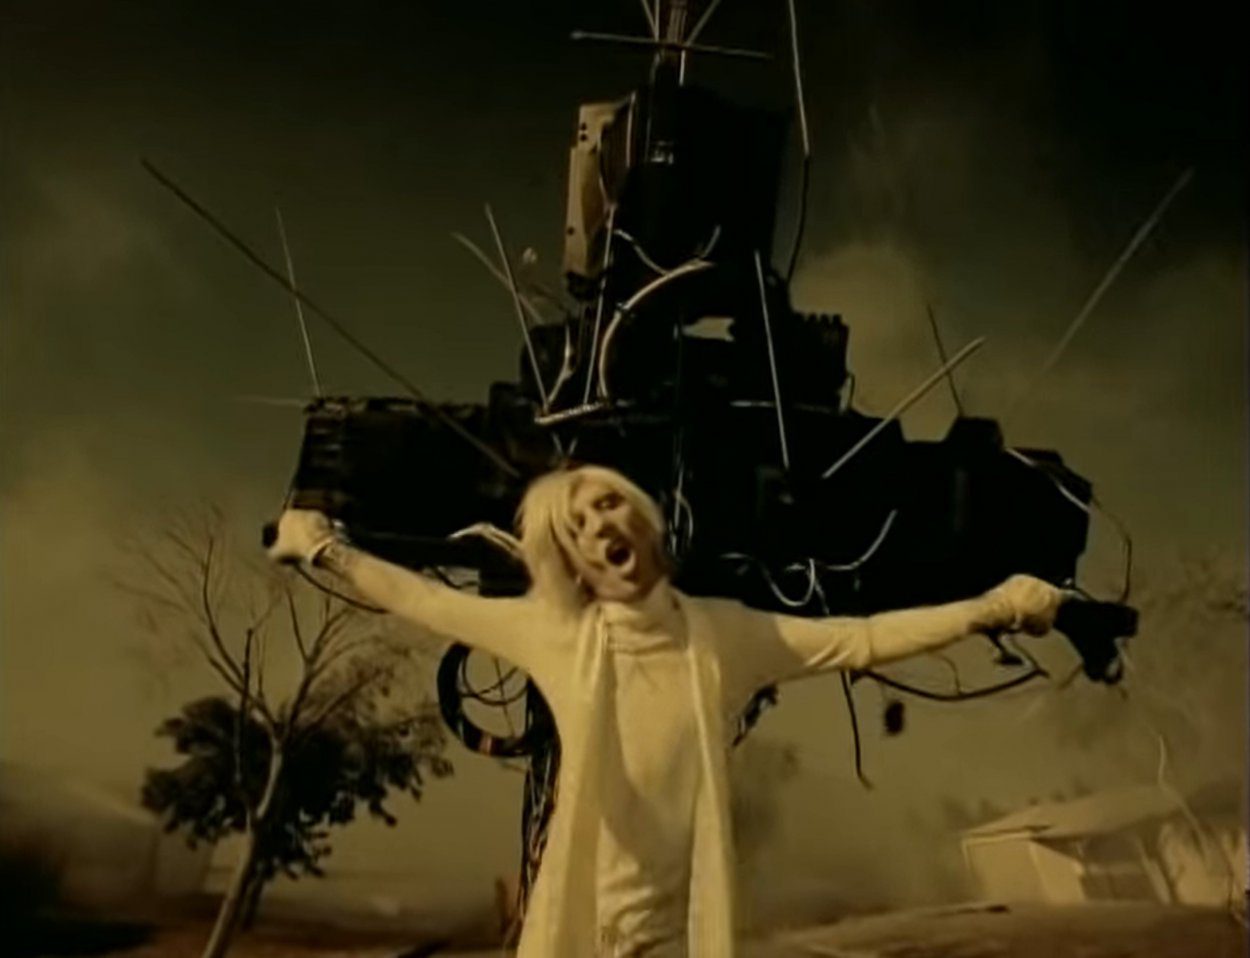 Marilyn Manson hanging from a crucifix made of TVs in the "I Don't Like the Drugs (But the Drugs Like Me)" music video